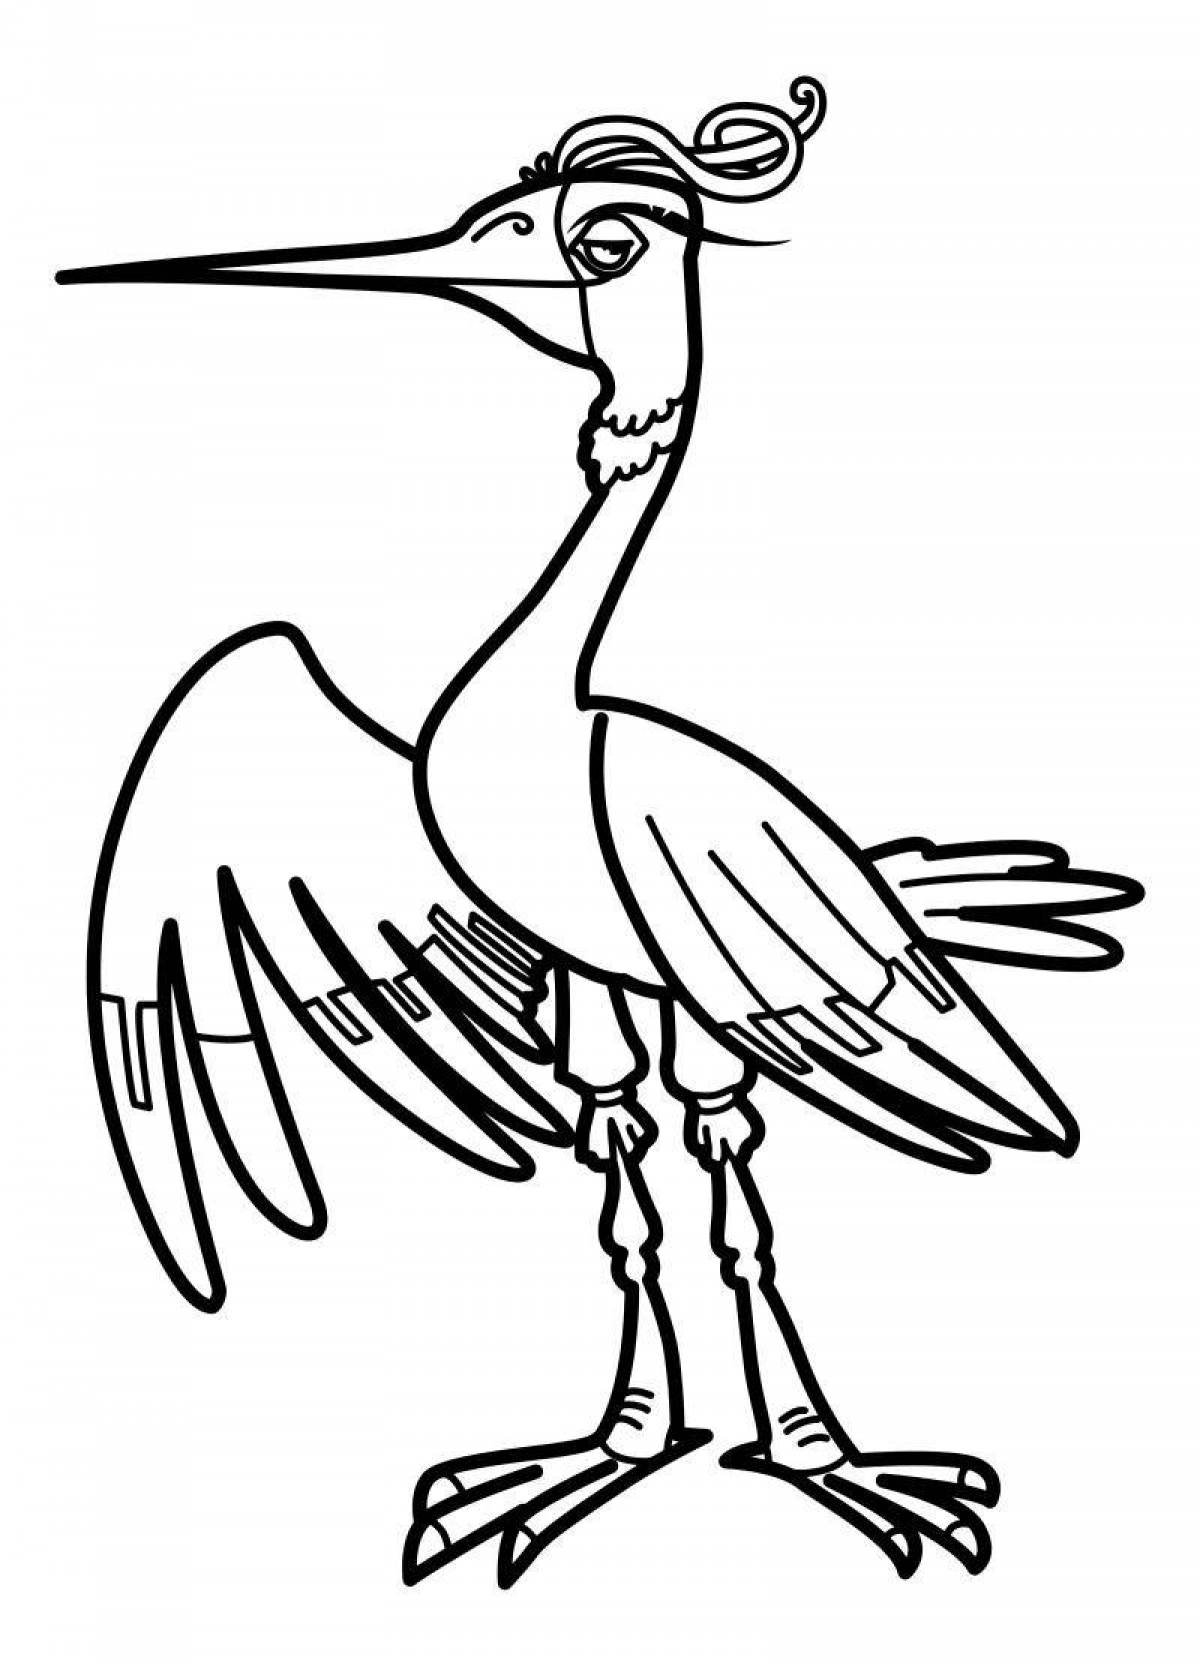 Bright coloring stork for the little ones